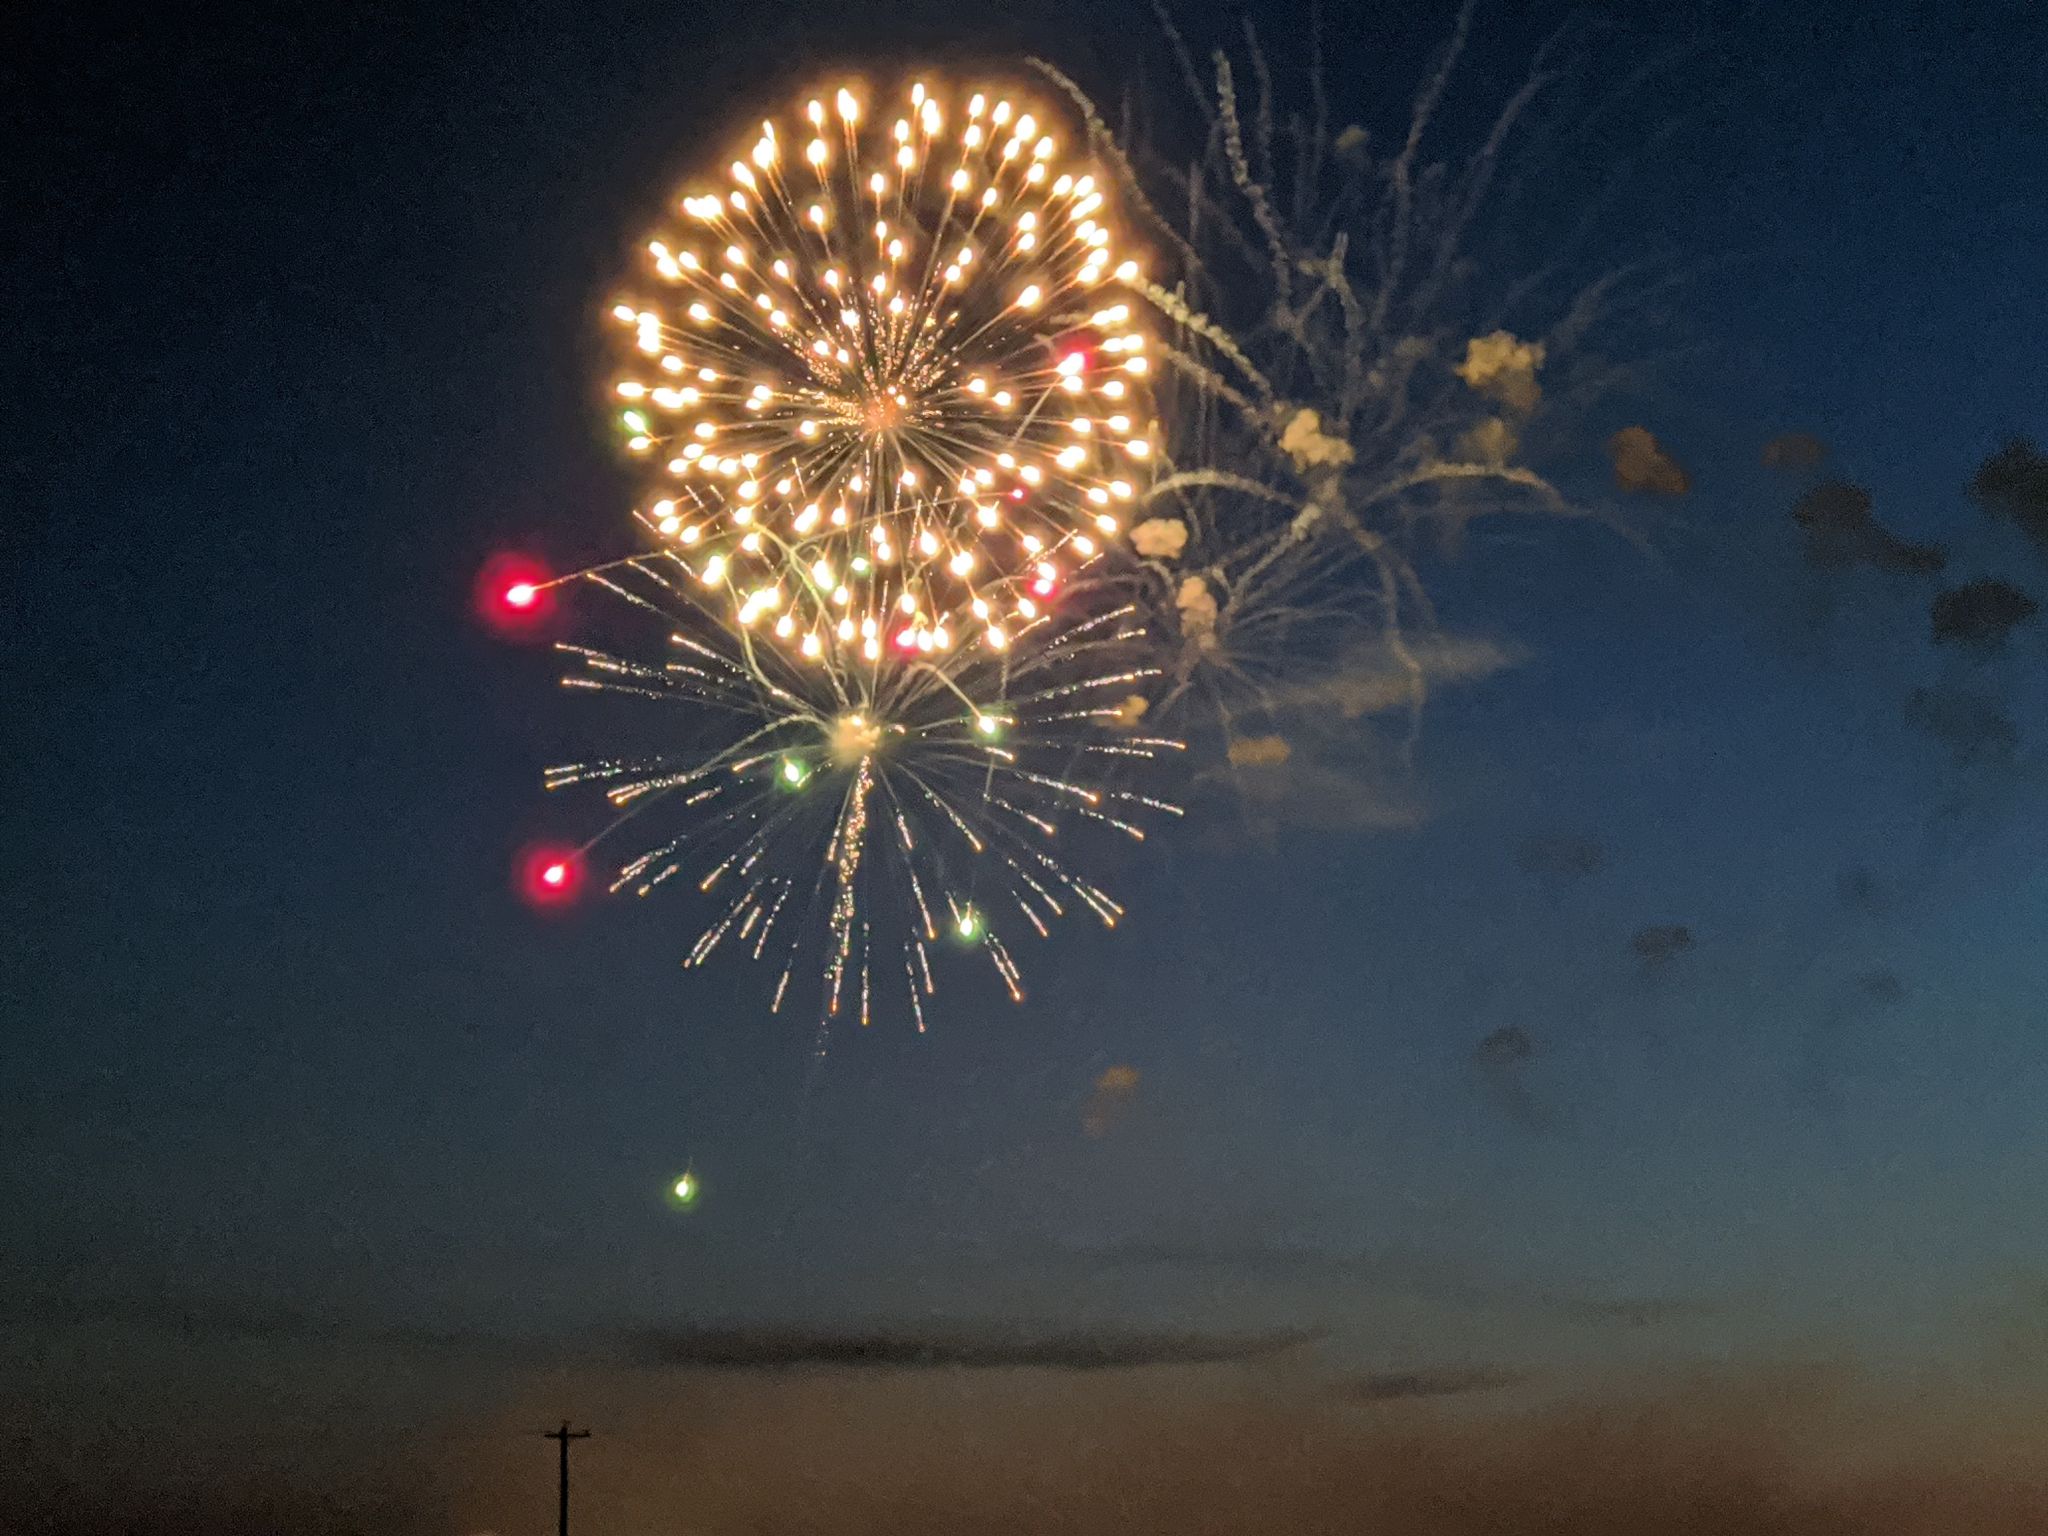 City of Midland plans Fourth of July fireworks